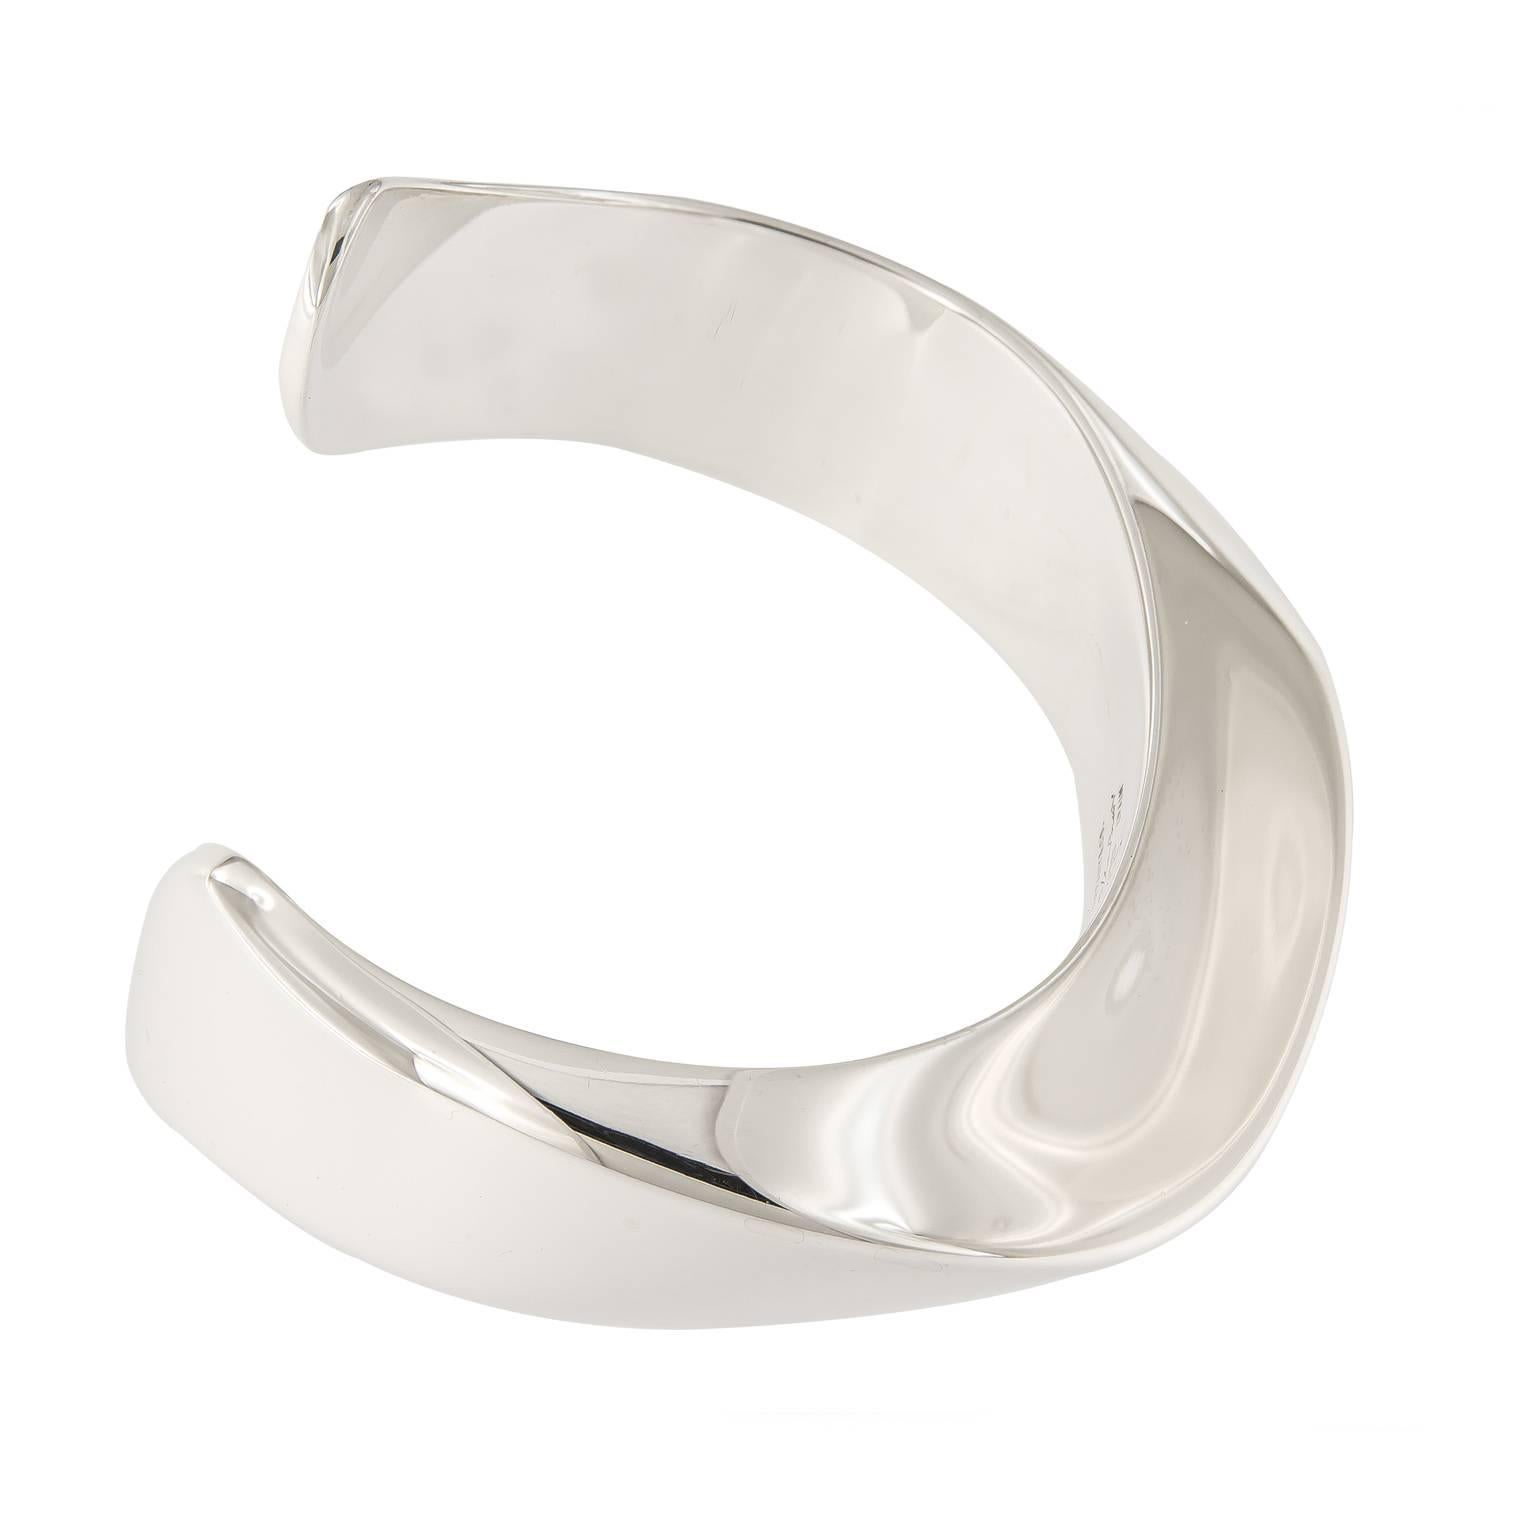 This Cuff bracelet is contemporary and classic Elsa Peretti design. Weighs 39.7 grams. Inner Diameter 2.25 in x 1.75 in

Marked Tiffany & Co.